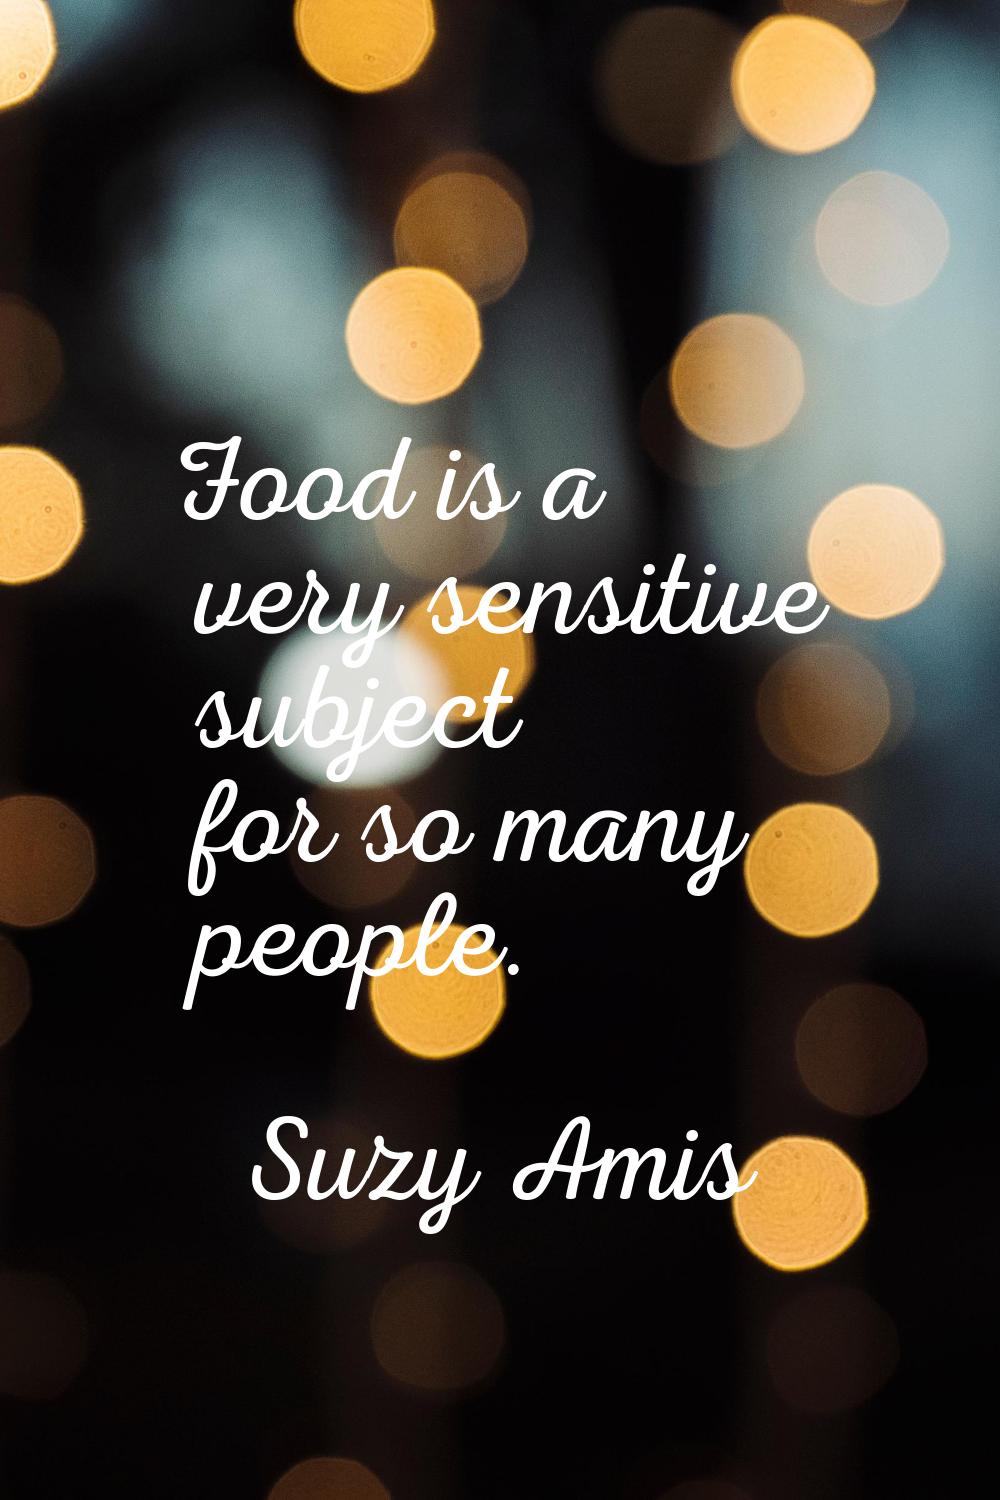 Food is a very sensitive subject for so many people.